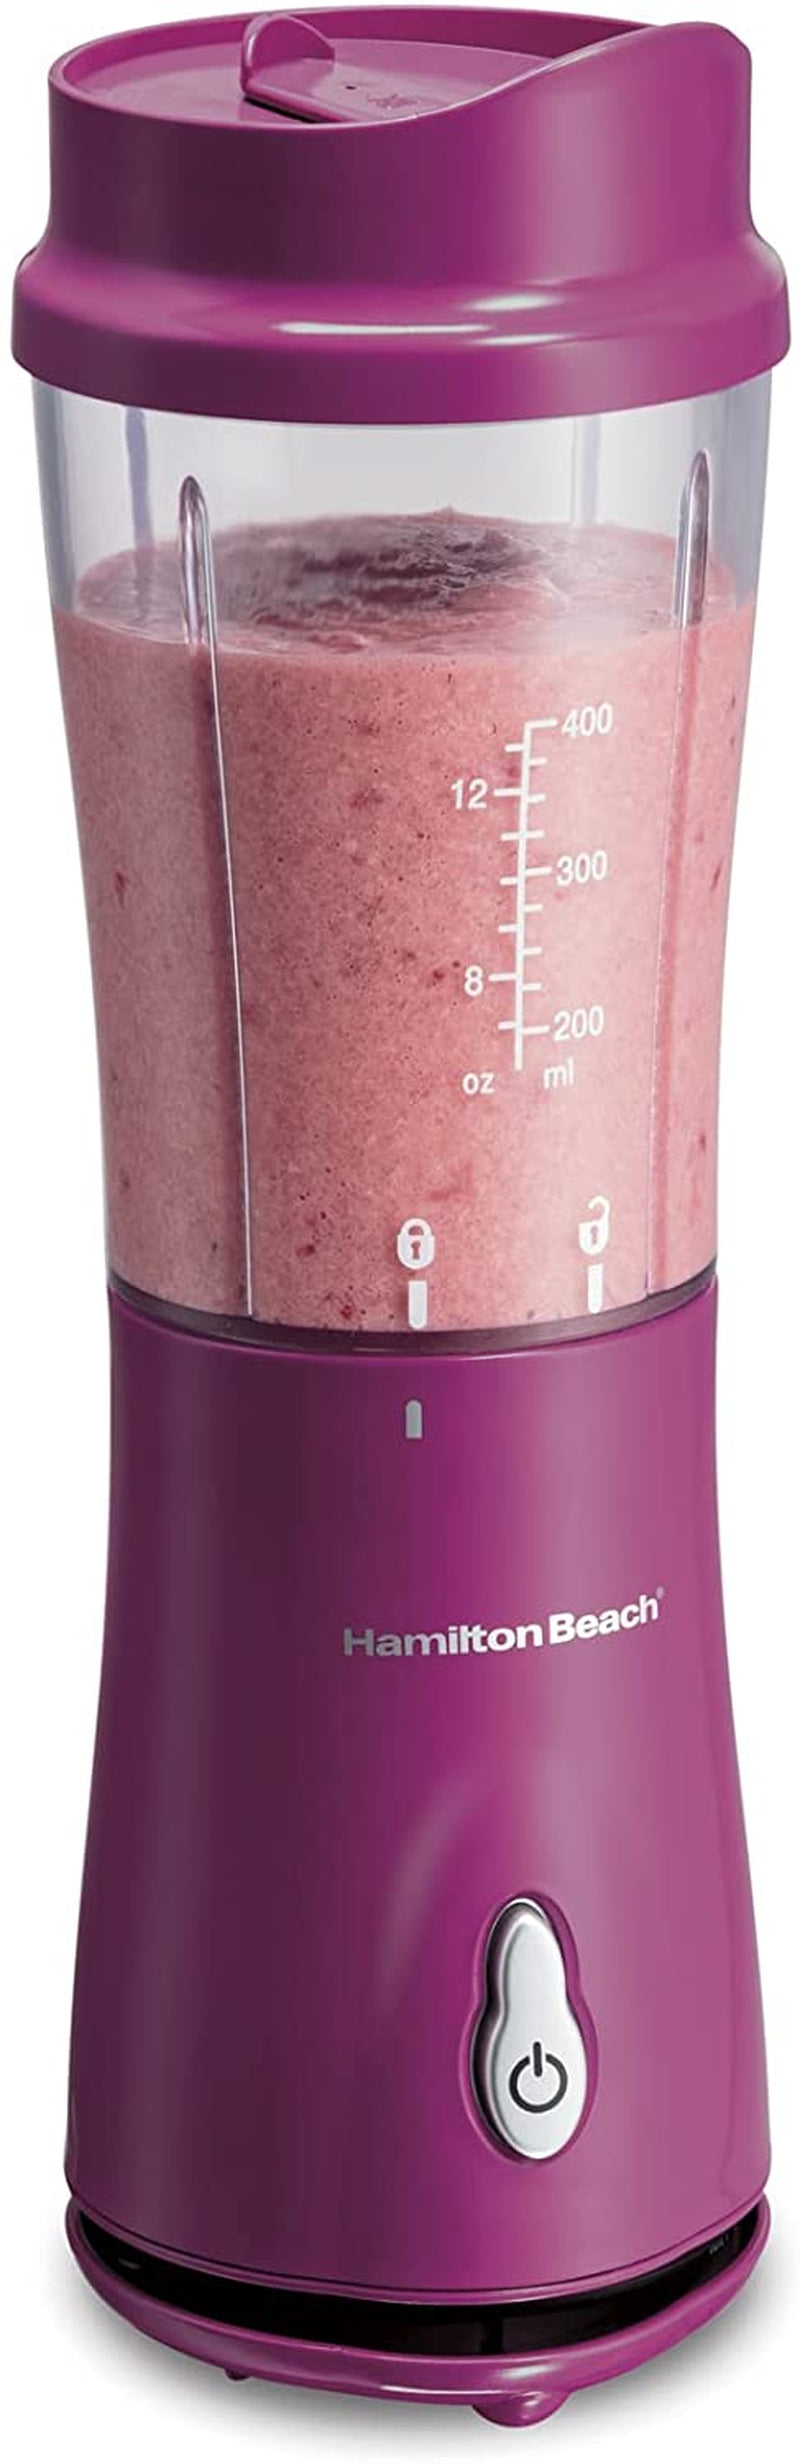 Portable Blender for Shakes and Smoothies with 14 Oz BPA Free Travel Cup and Lid, Durable Stainless Steel Blades for Powerful Blending Performance, Raspberry (51131)